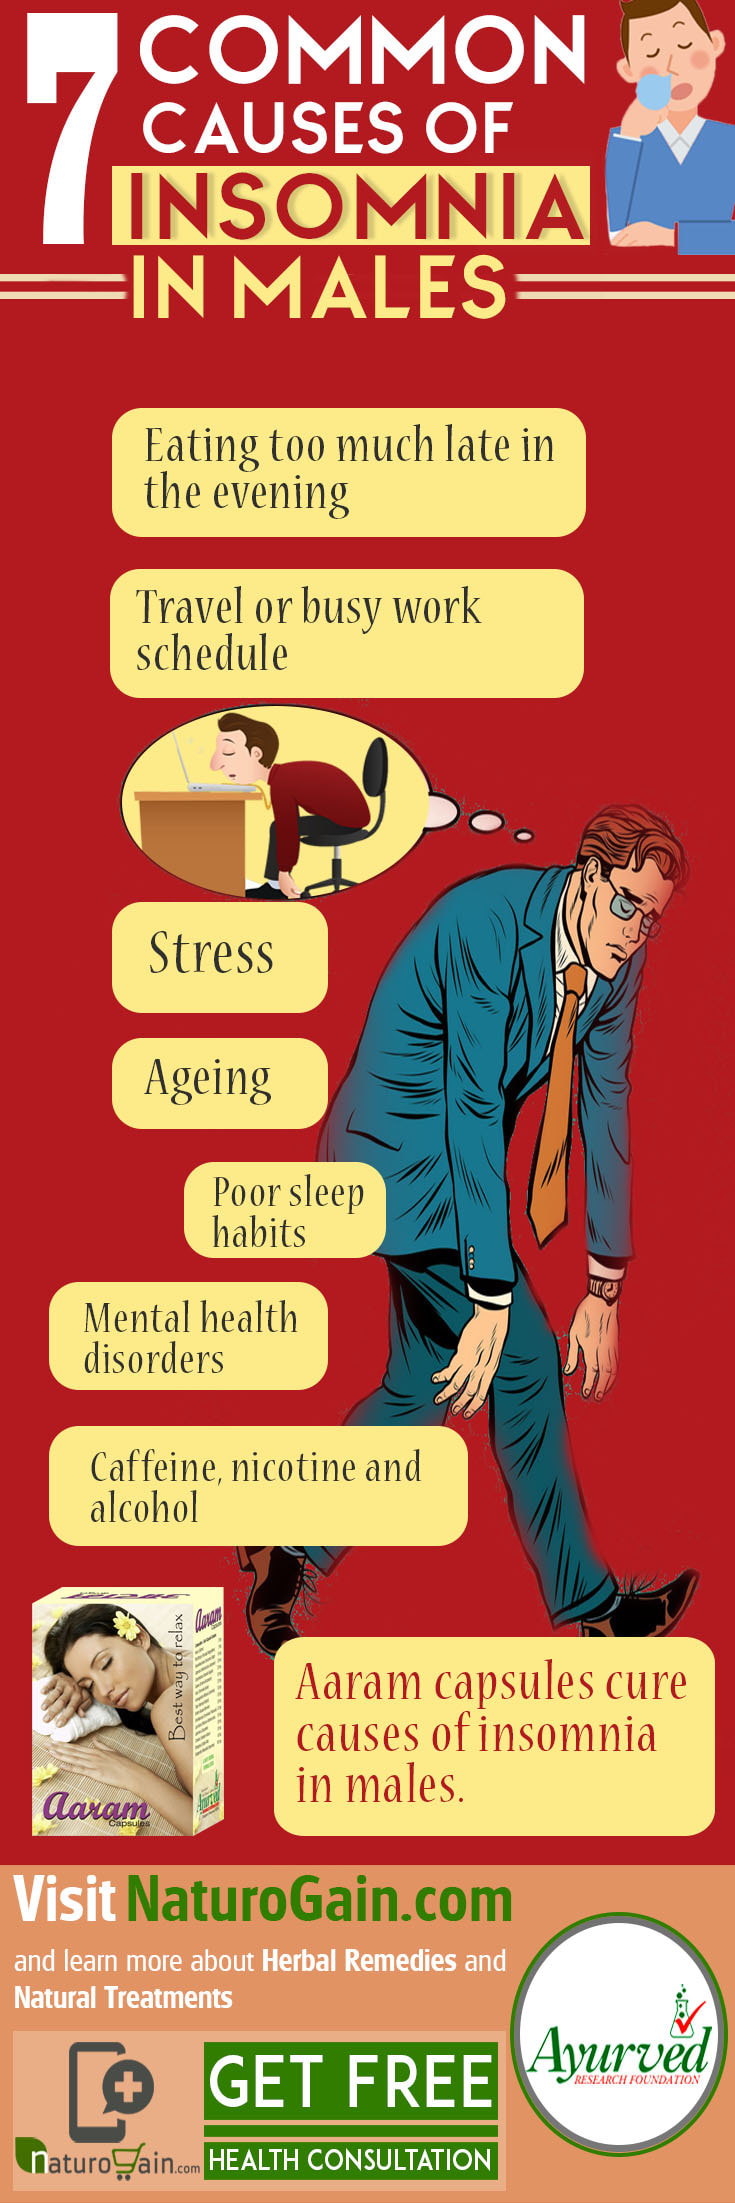 7-common-causes-insomnia-infographic